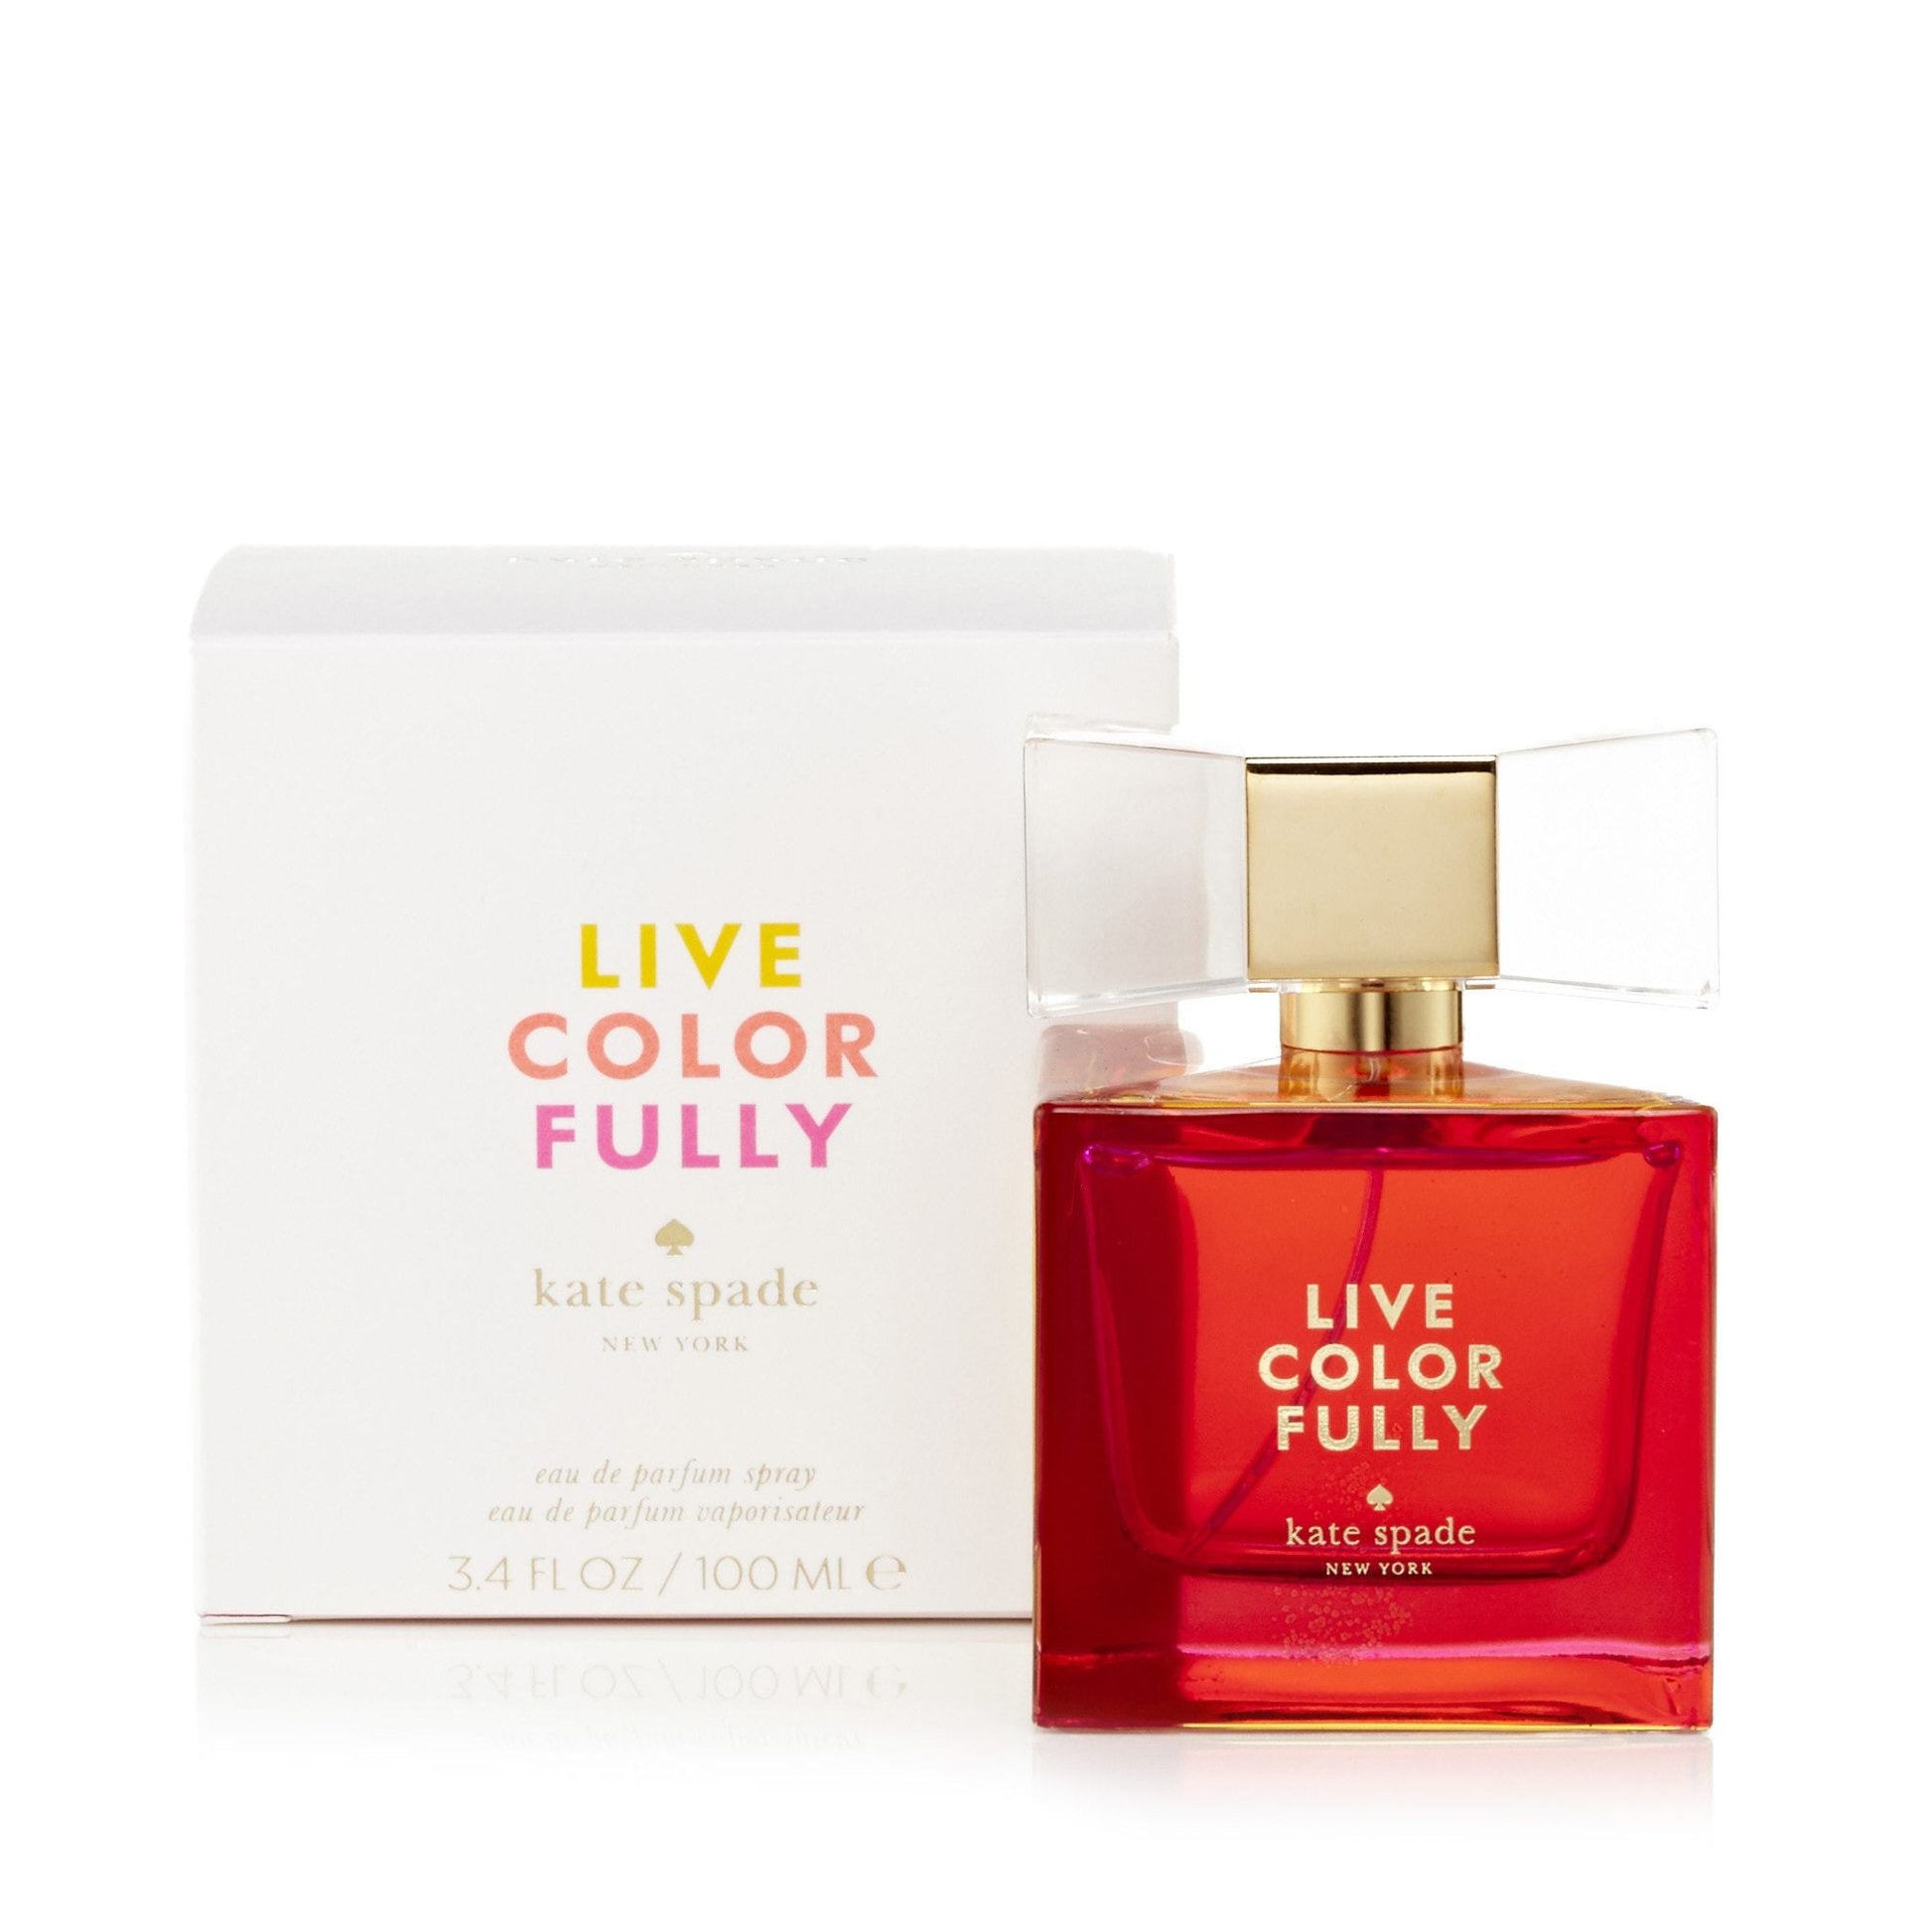 N.Y. Live Colorfully Eau de Parfum Spray for Women by Kate Spade, Product image 1